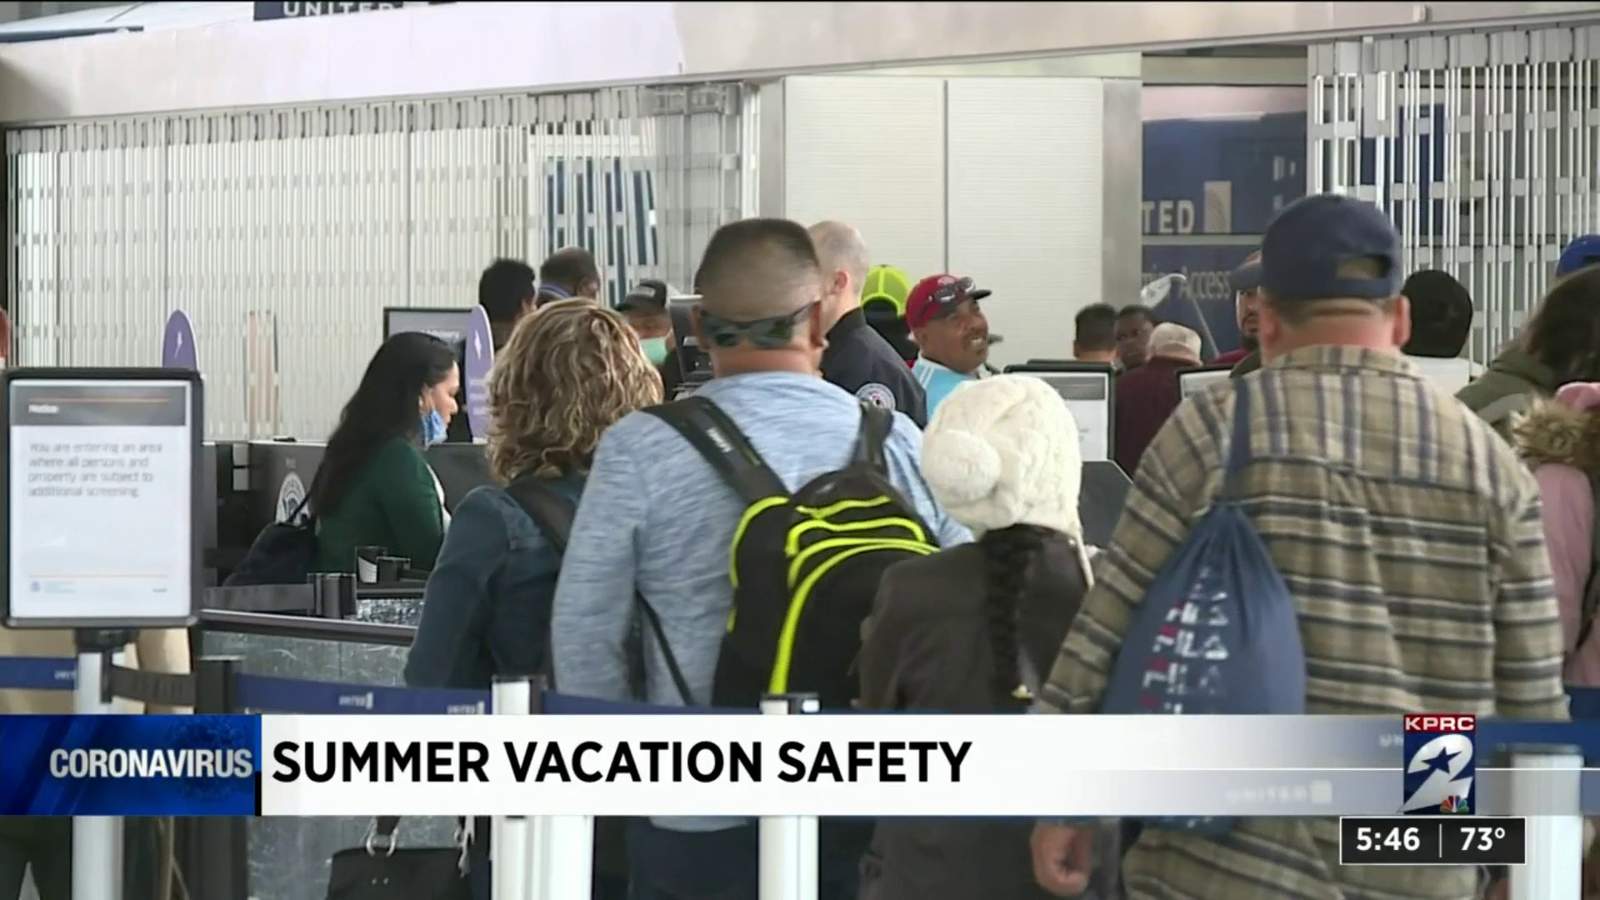 What to do about summer travel plans during coronavirus